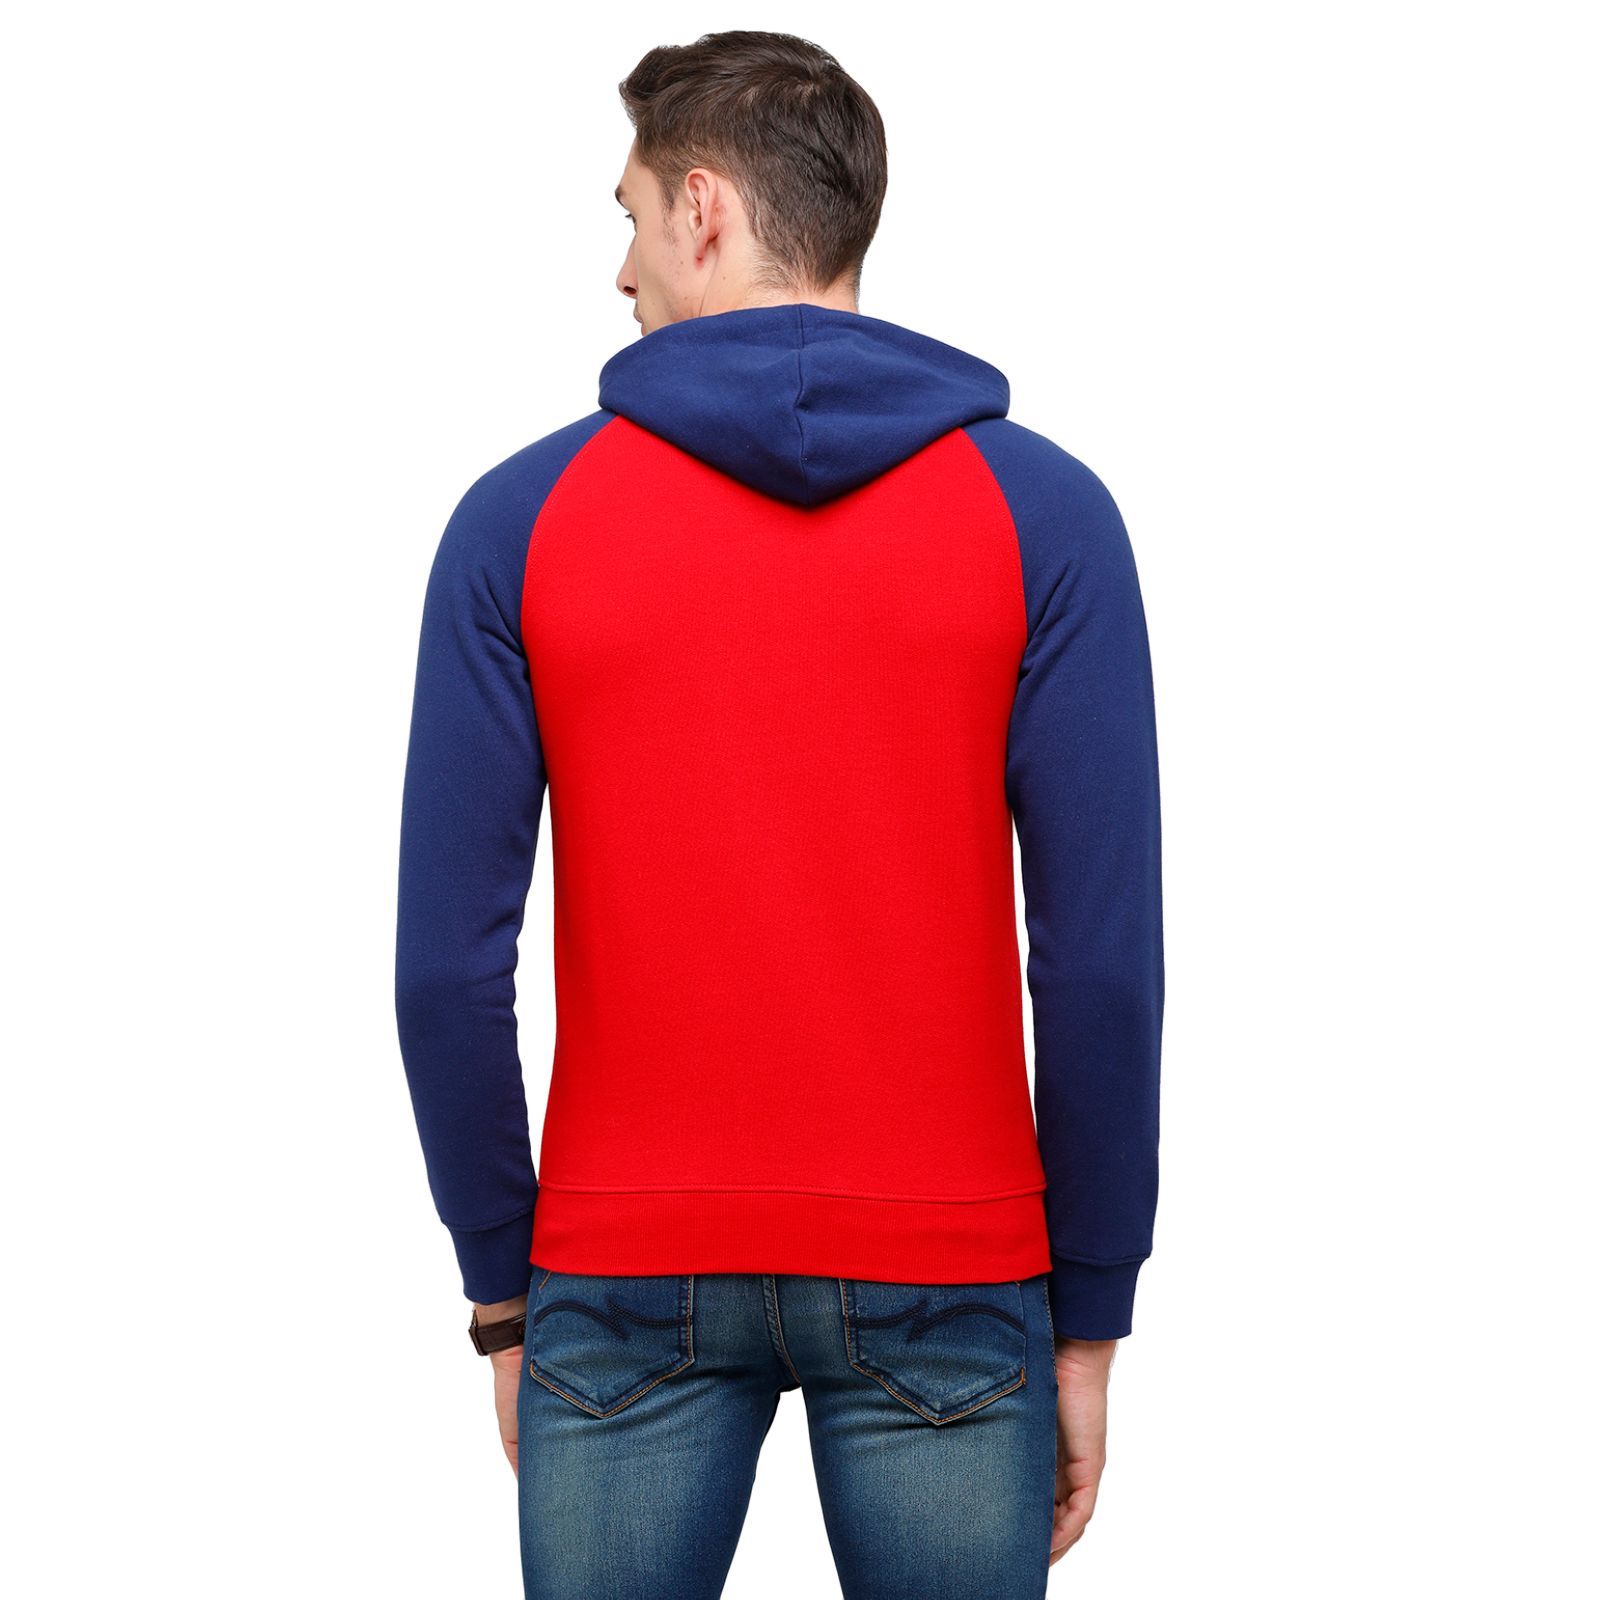 Classic Polo Men's Printed Full Sleeve Red & Blue Hood Sweat Shirt - CPSS-327A Sweat Shirts Classic Polo 